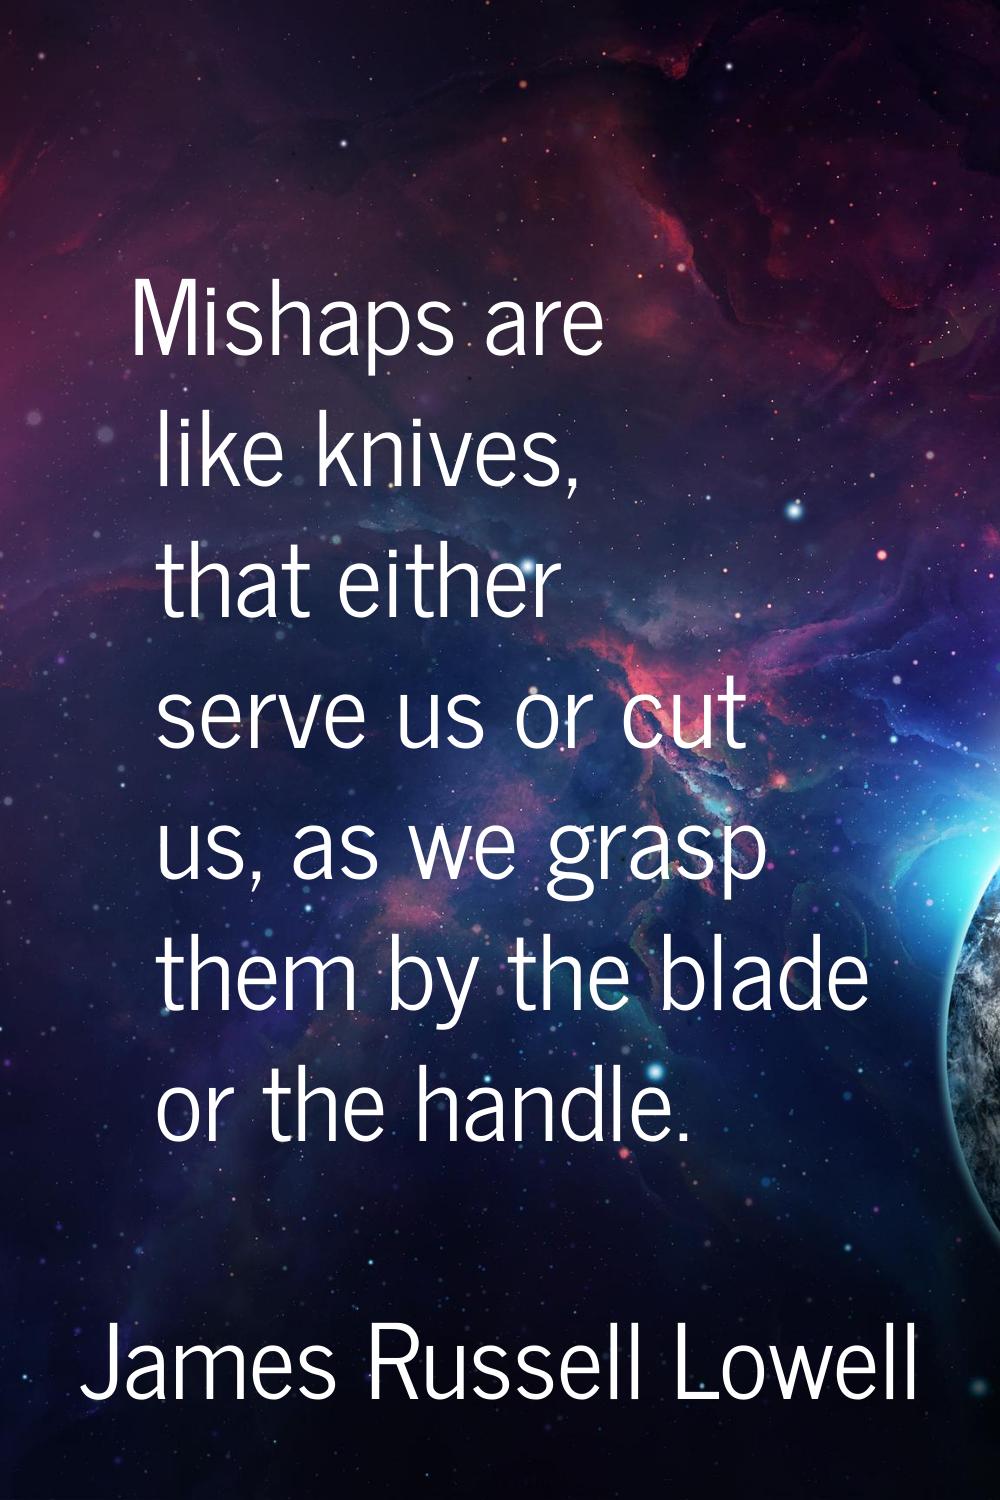 Mishaps are like knives, that either serve us or cut us, as we grasp them by the blade or the handl